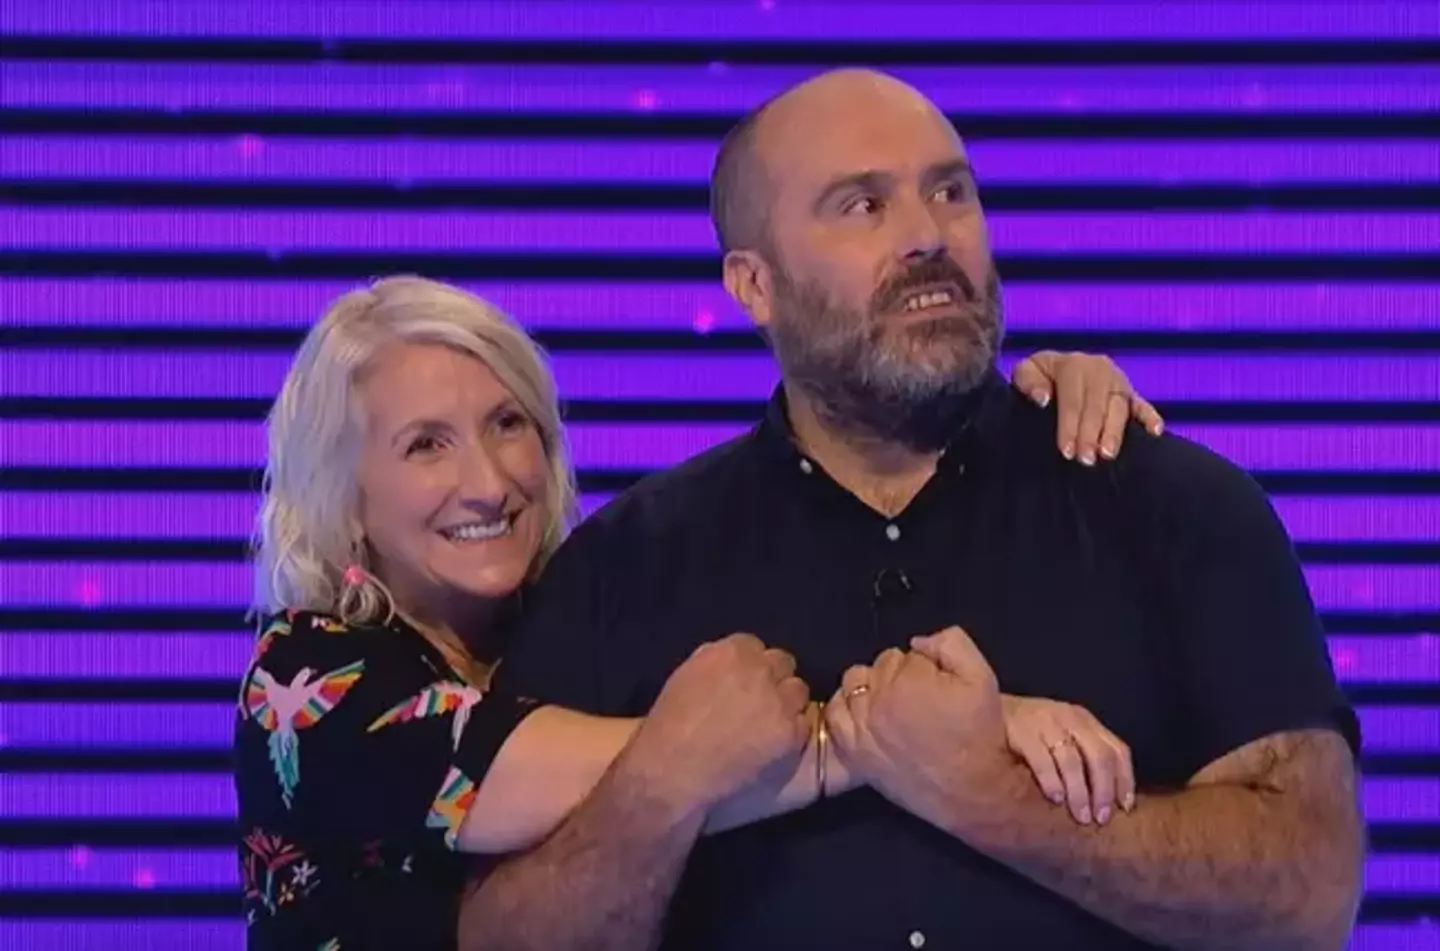 Viewers thought that Helen and Charlie were given too easy of a question.